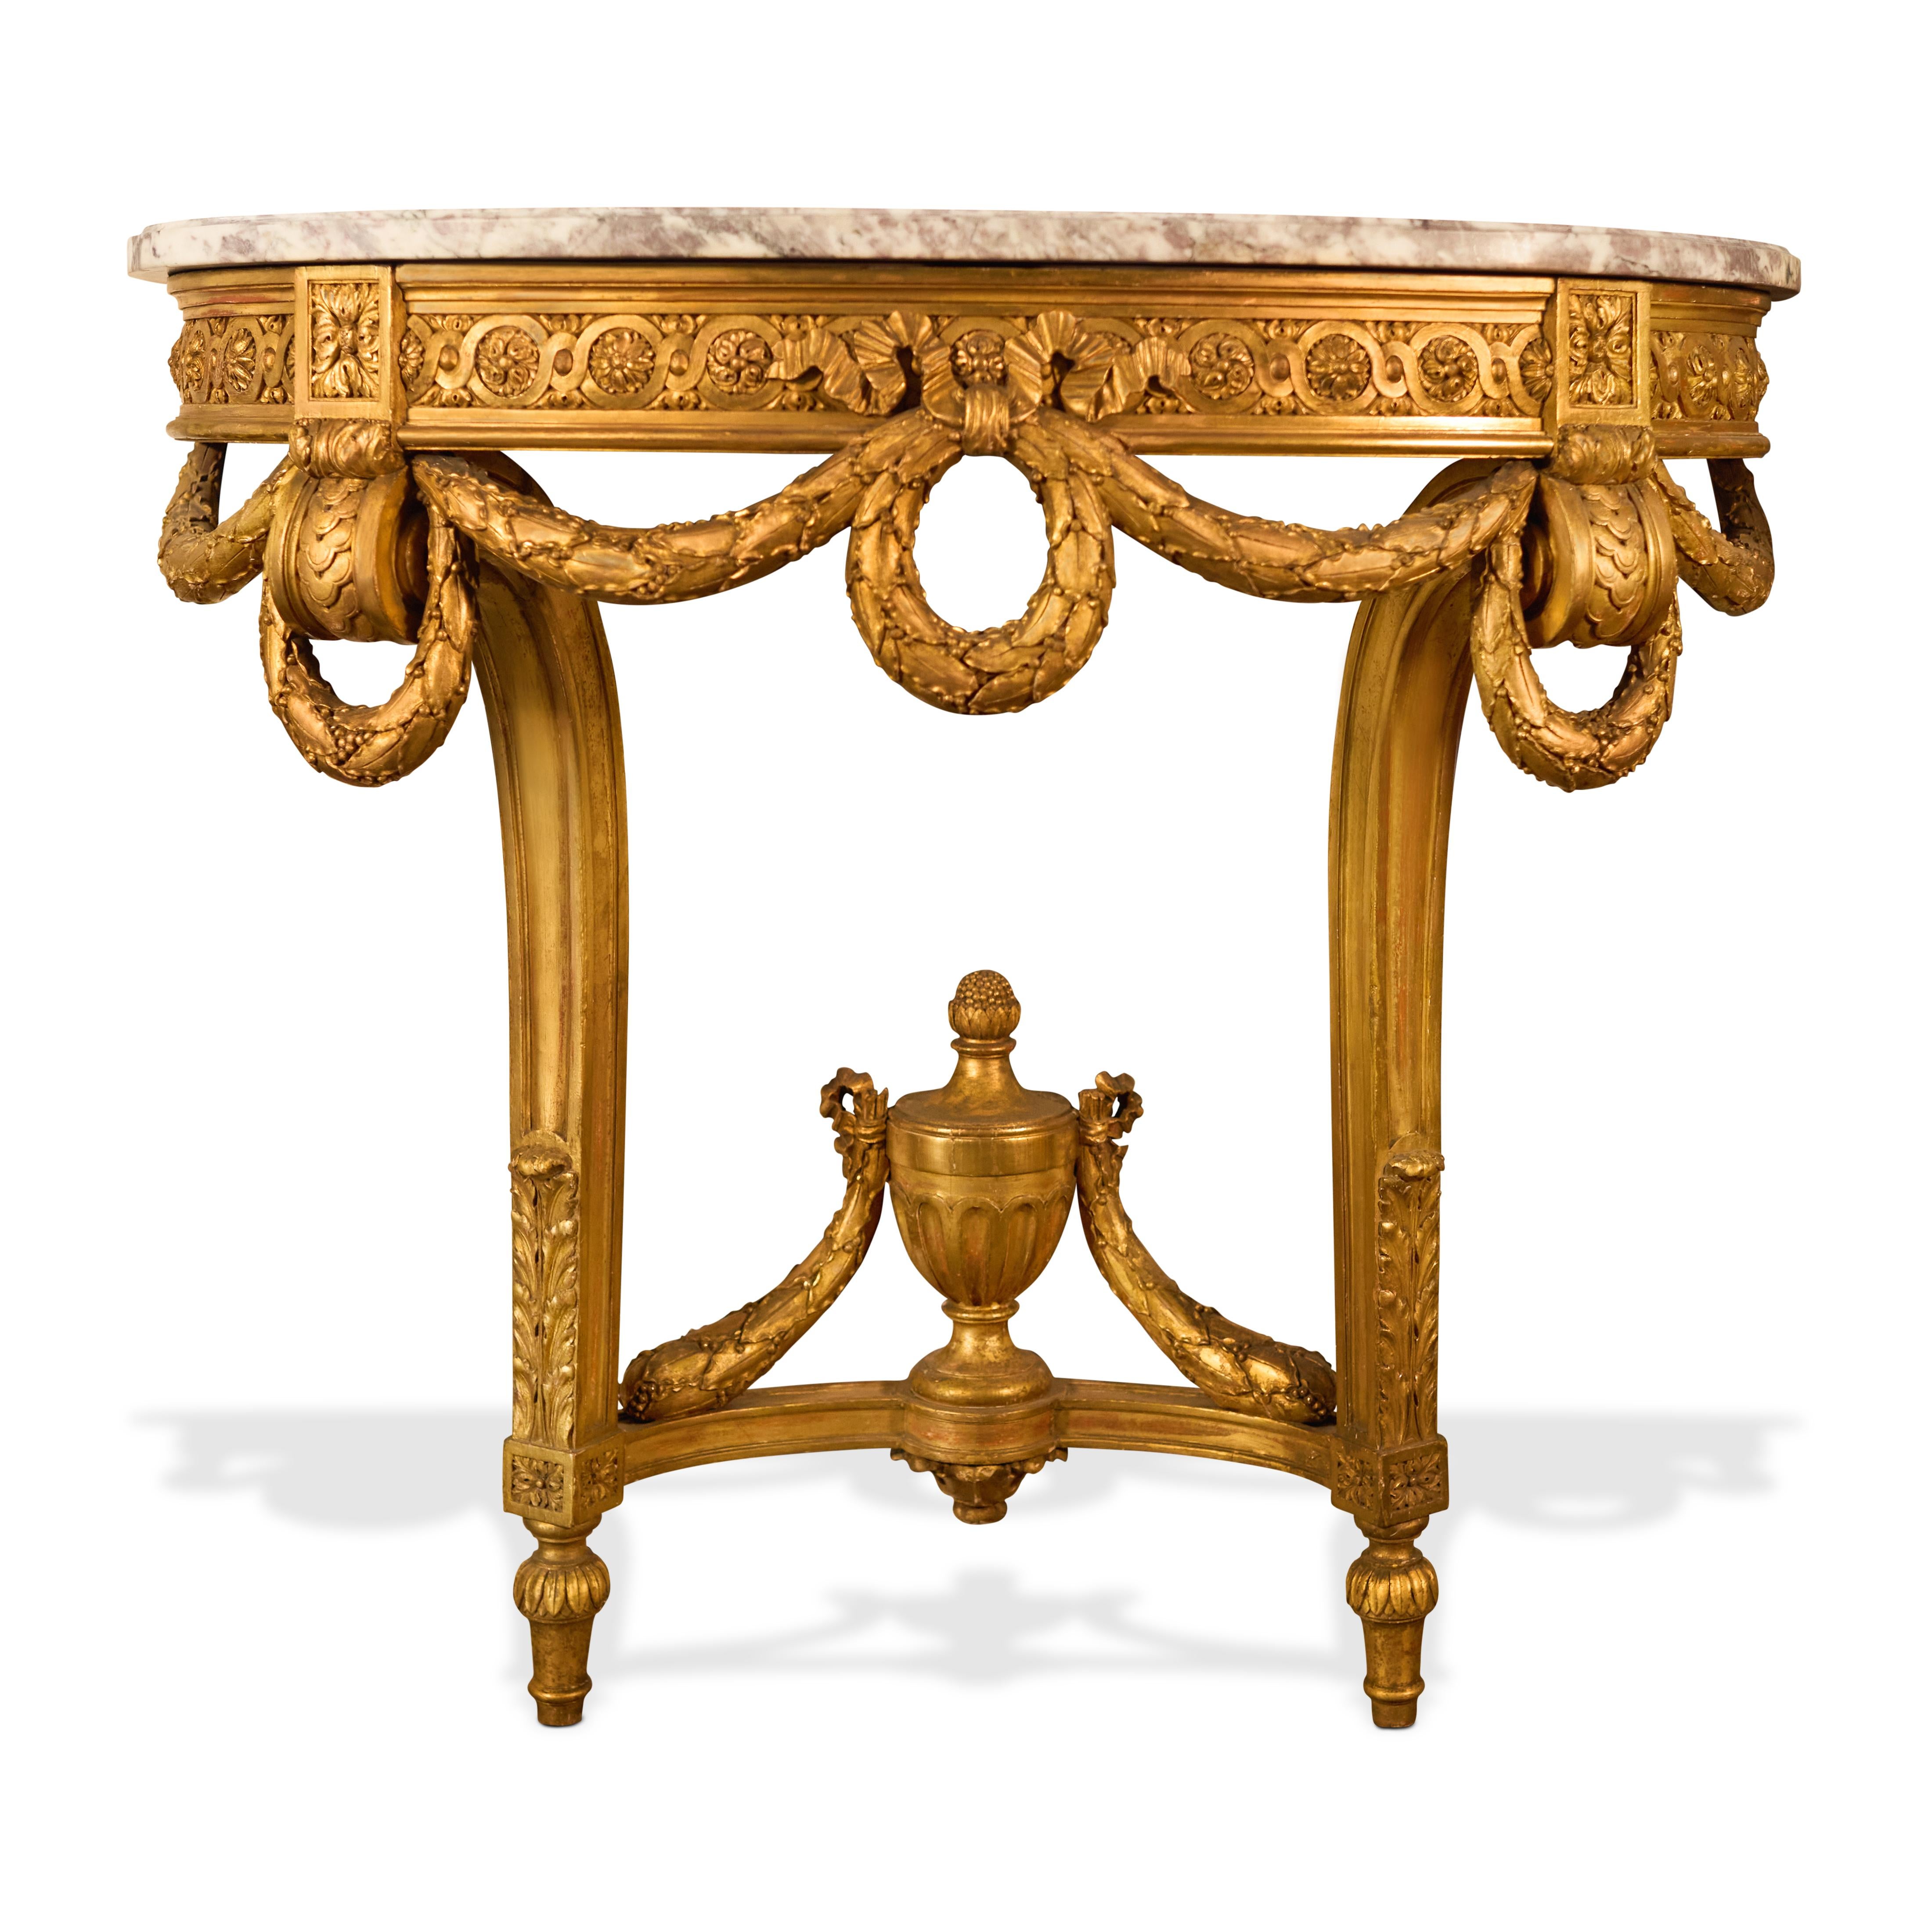 FRANCOIS LINKE LOUIS XV CARVED WOOD MARBLE TOP CONSOLE TABLE, CIRCA 1890, By Francois Linke.

The table is composed of a veined marble top raised on two curved gilt wood legs, the rear of the console if flat and made to be placed along side a wall,